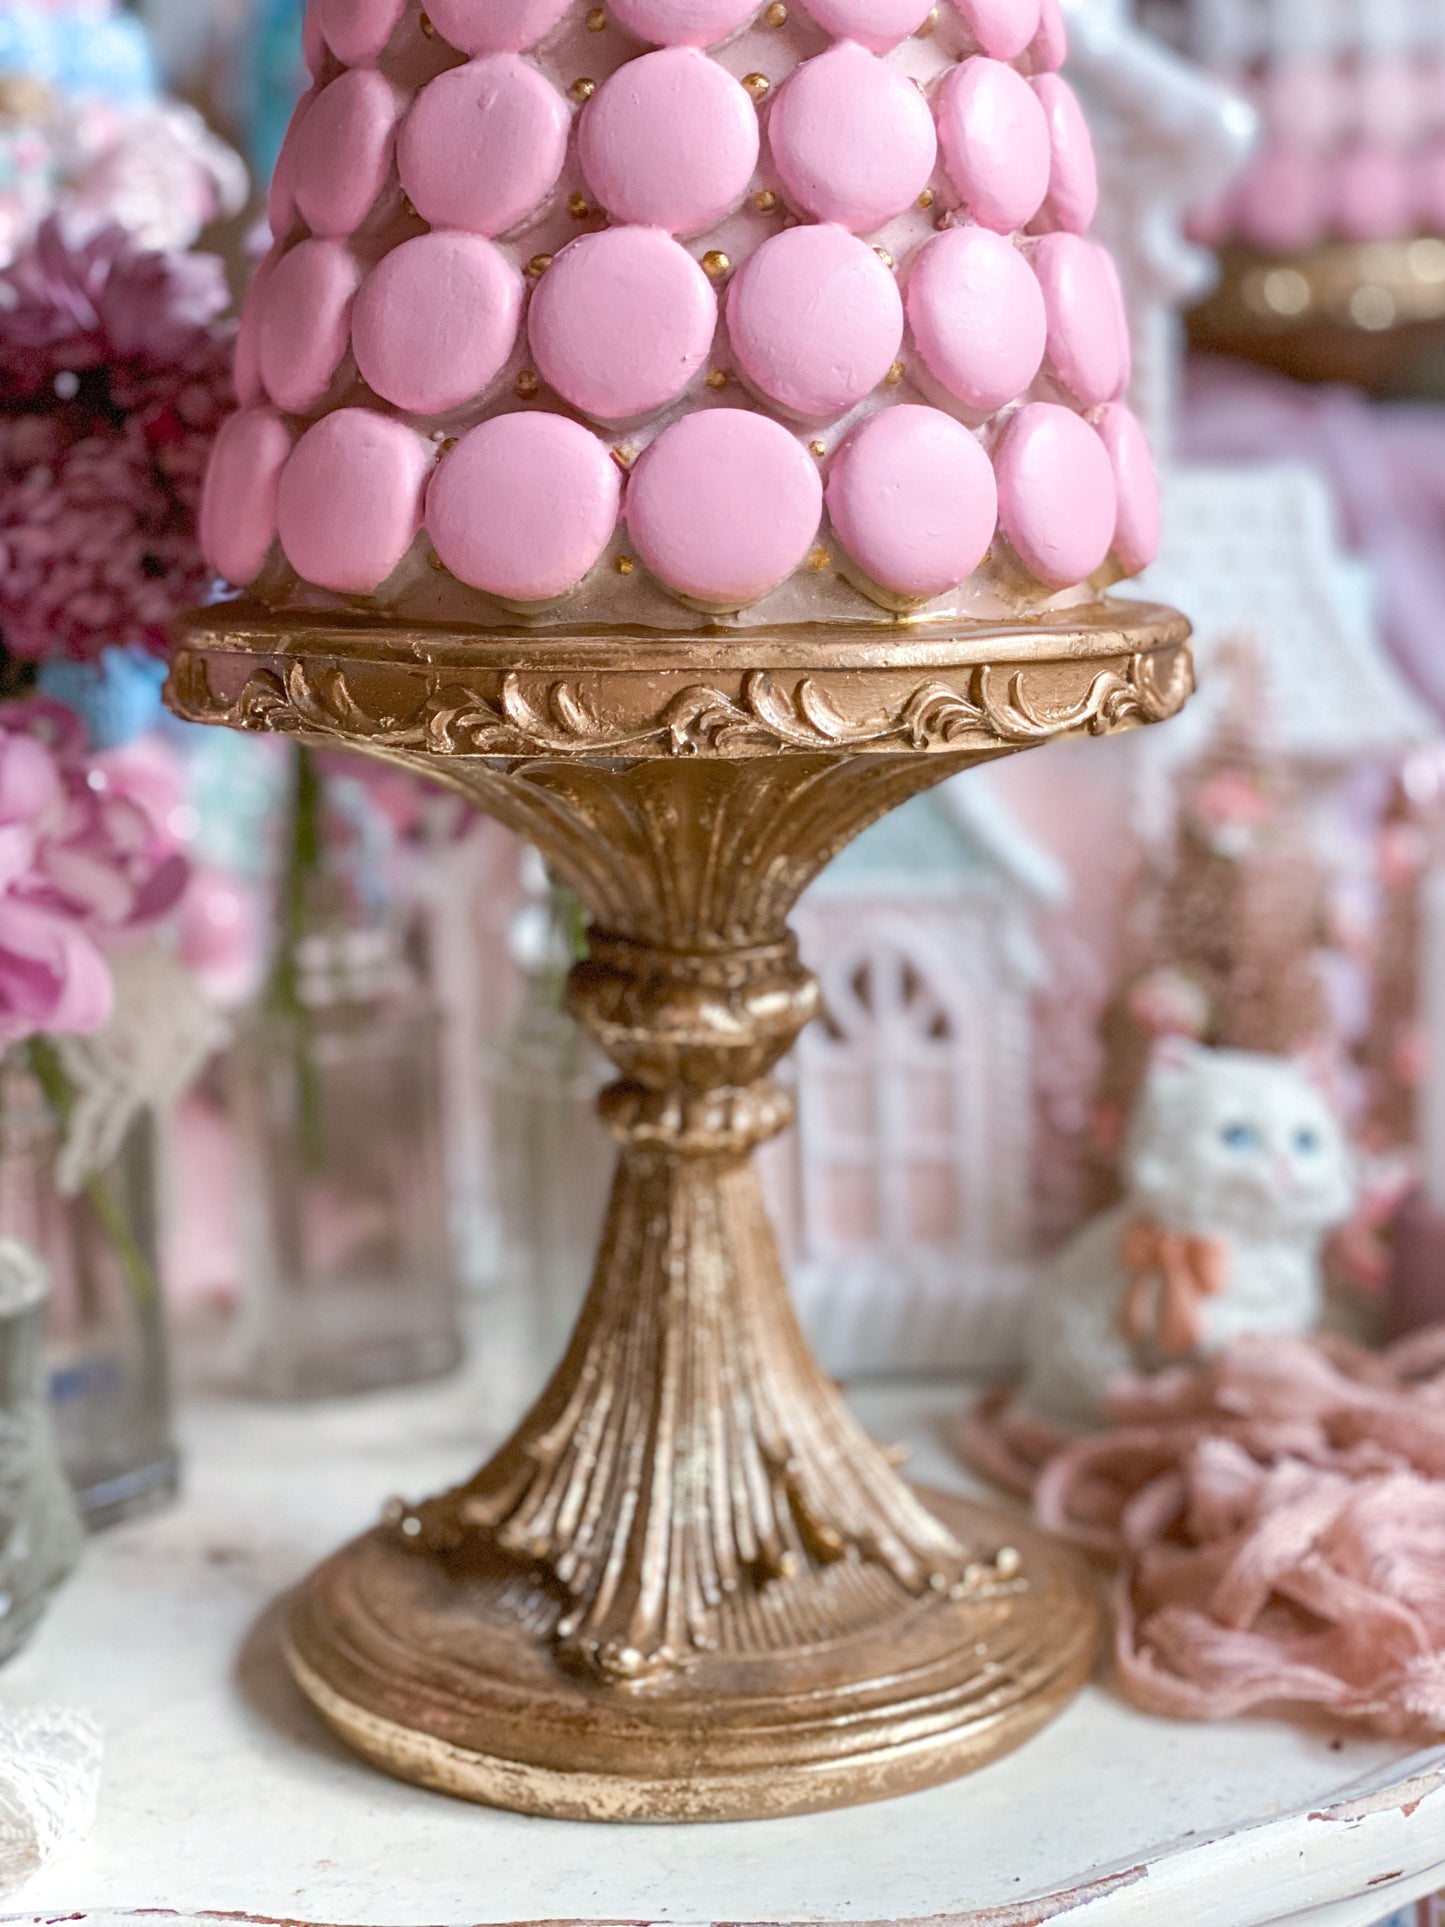 Bespoke Hand Painted Pink, White and Gold Macaron Tree